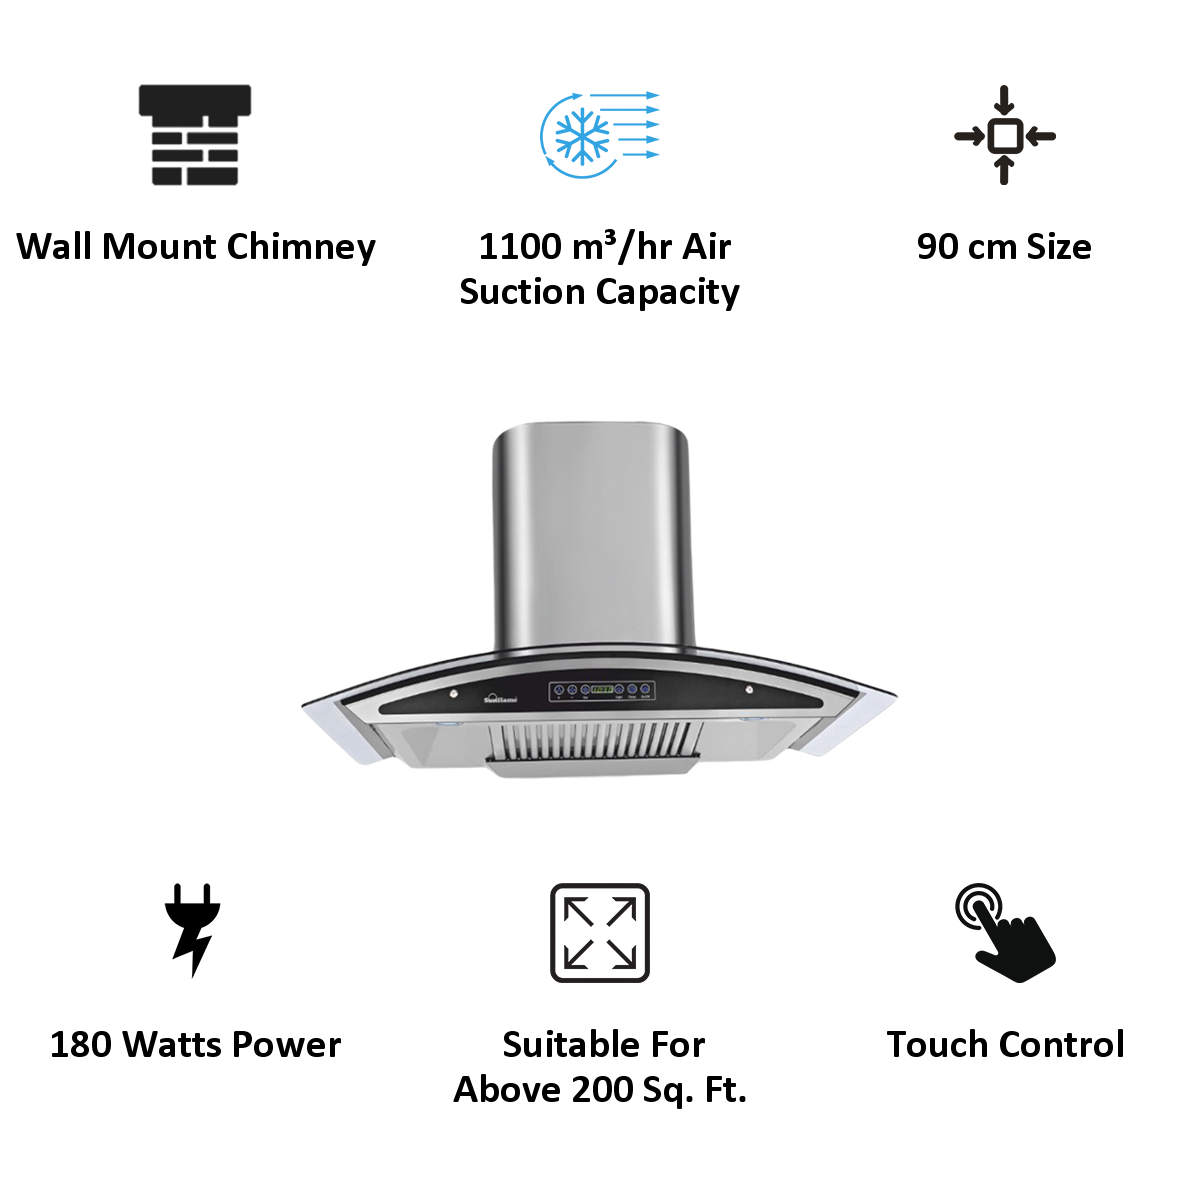 Sunflame Innova 90cm Baffle Filter Wall Mount Chimney (8183, Silver)_3